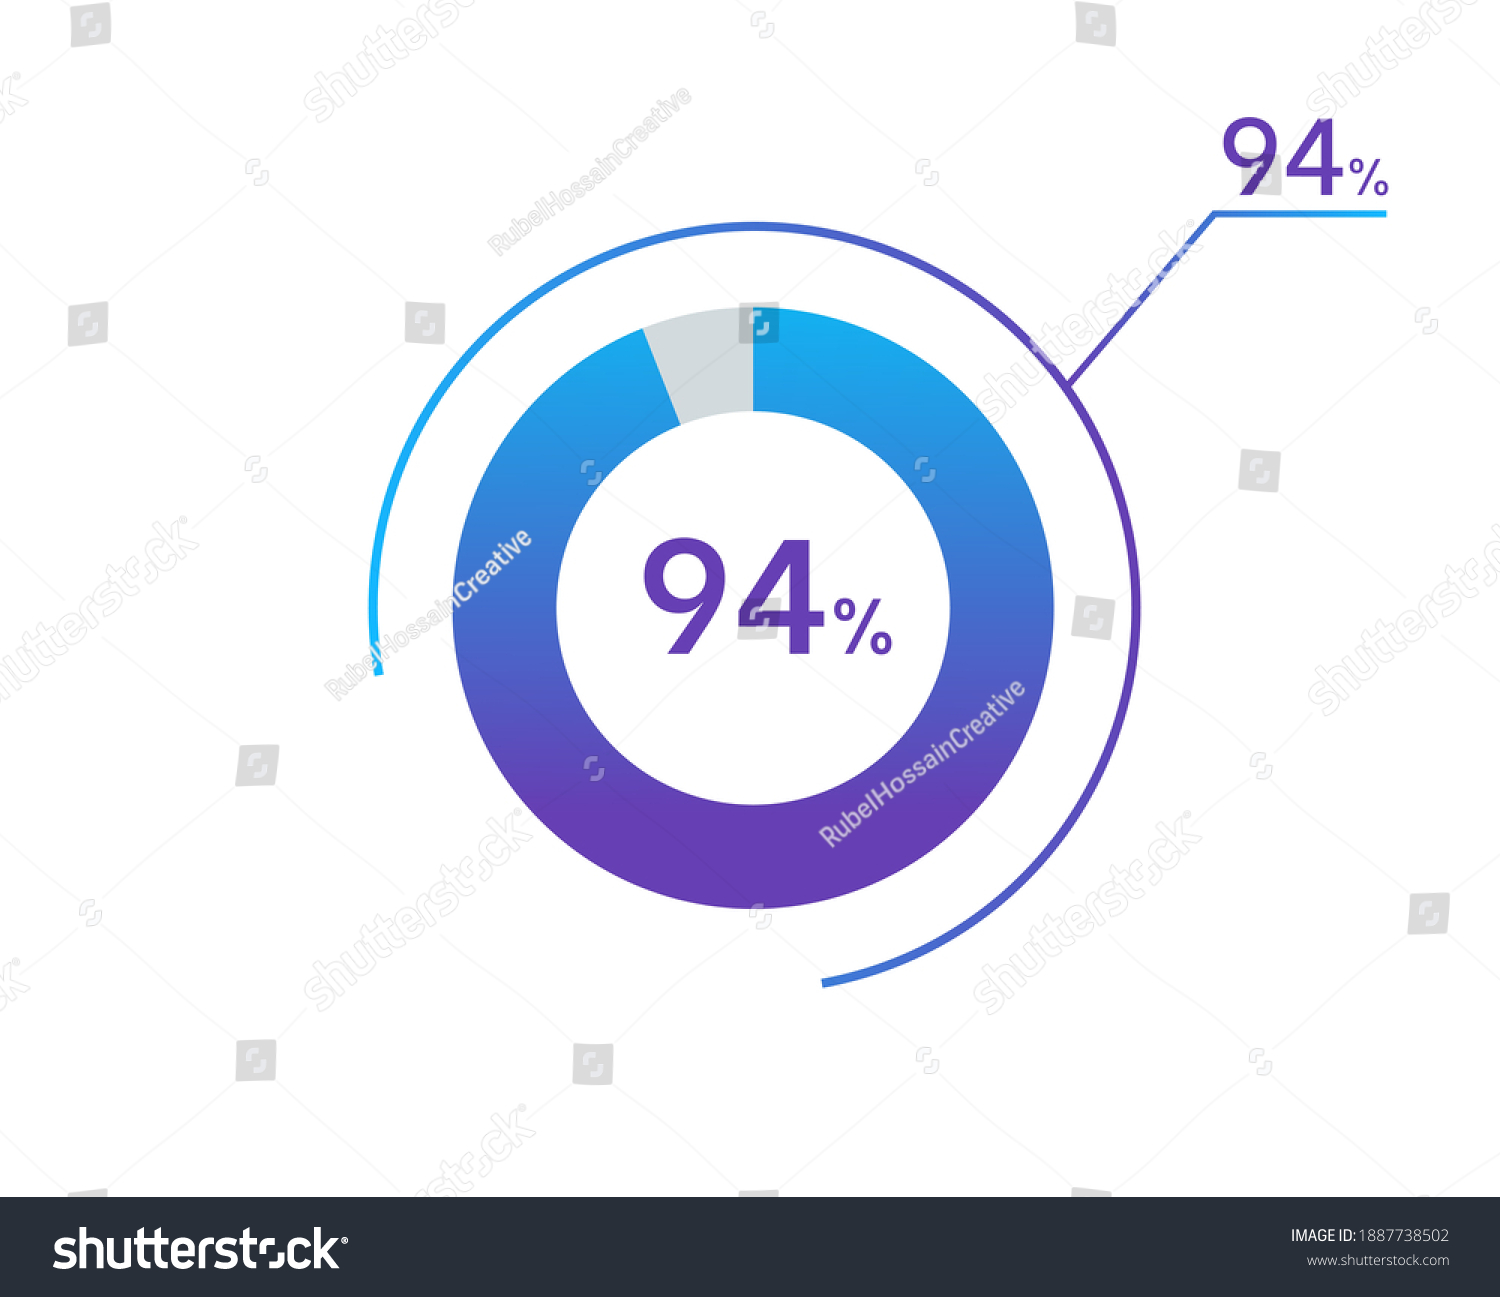 SVG of 94 percents pie chart infographic elements. 94% percentage infographic circle icons for download, illustration, business, web design svg